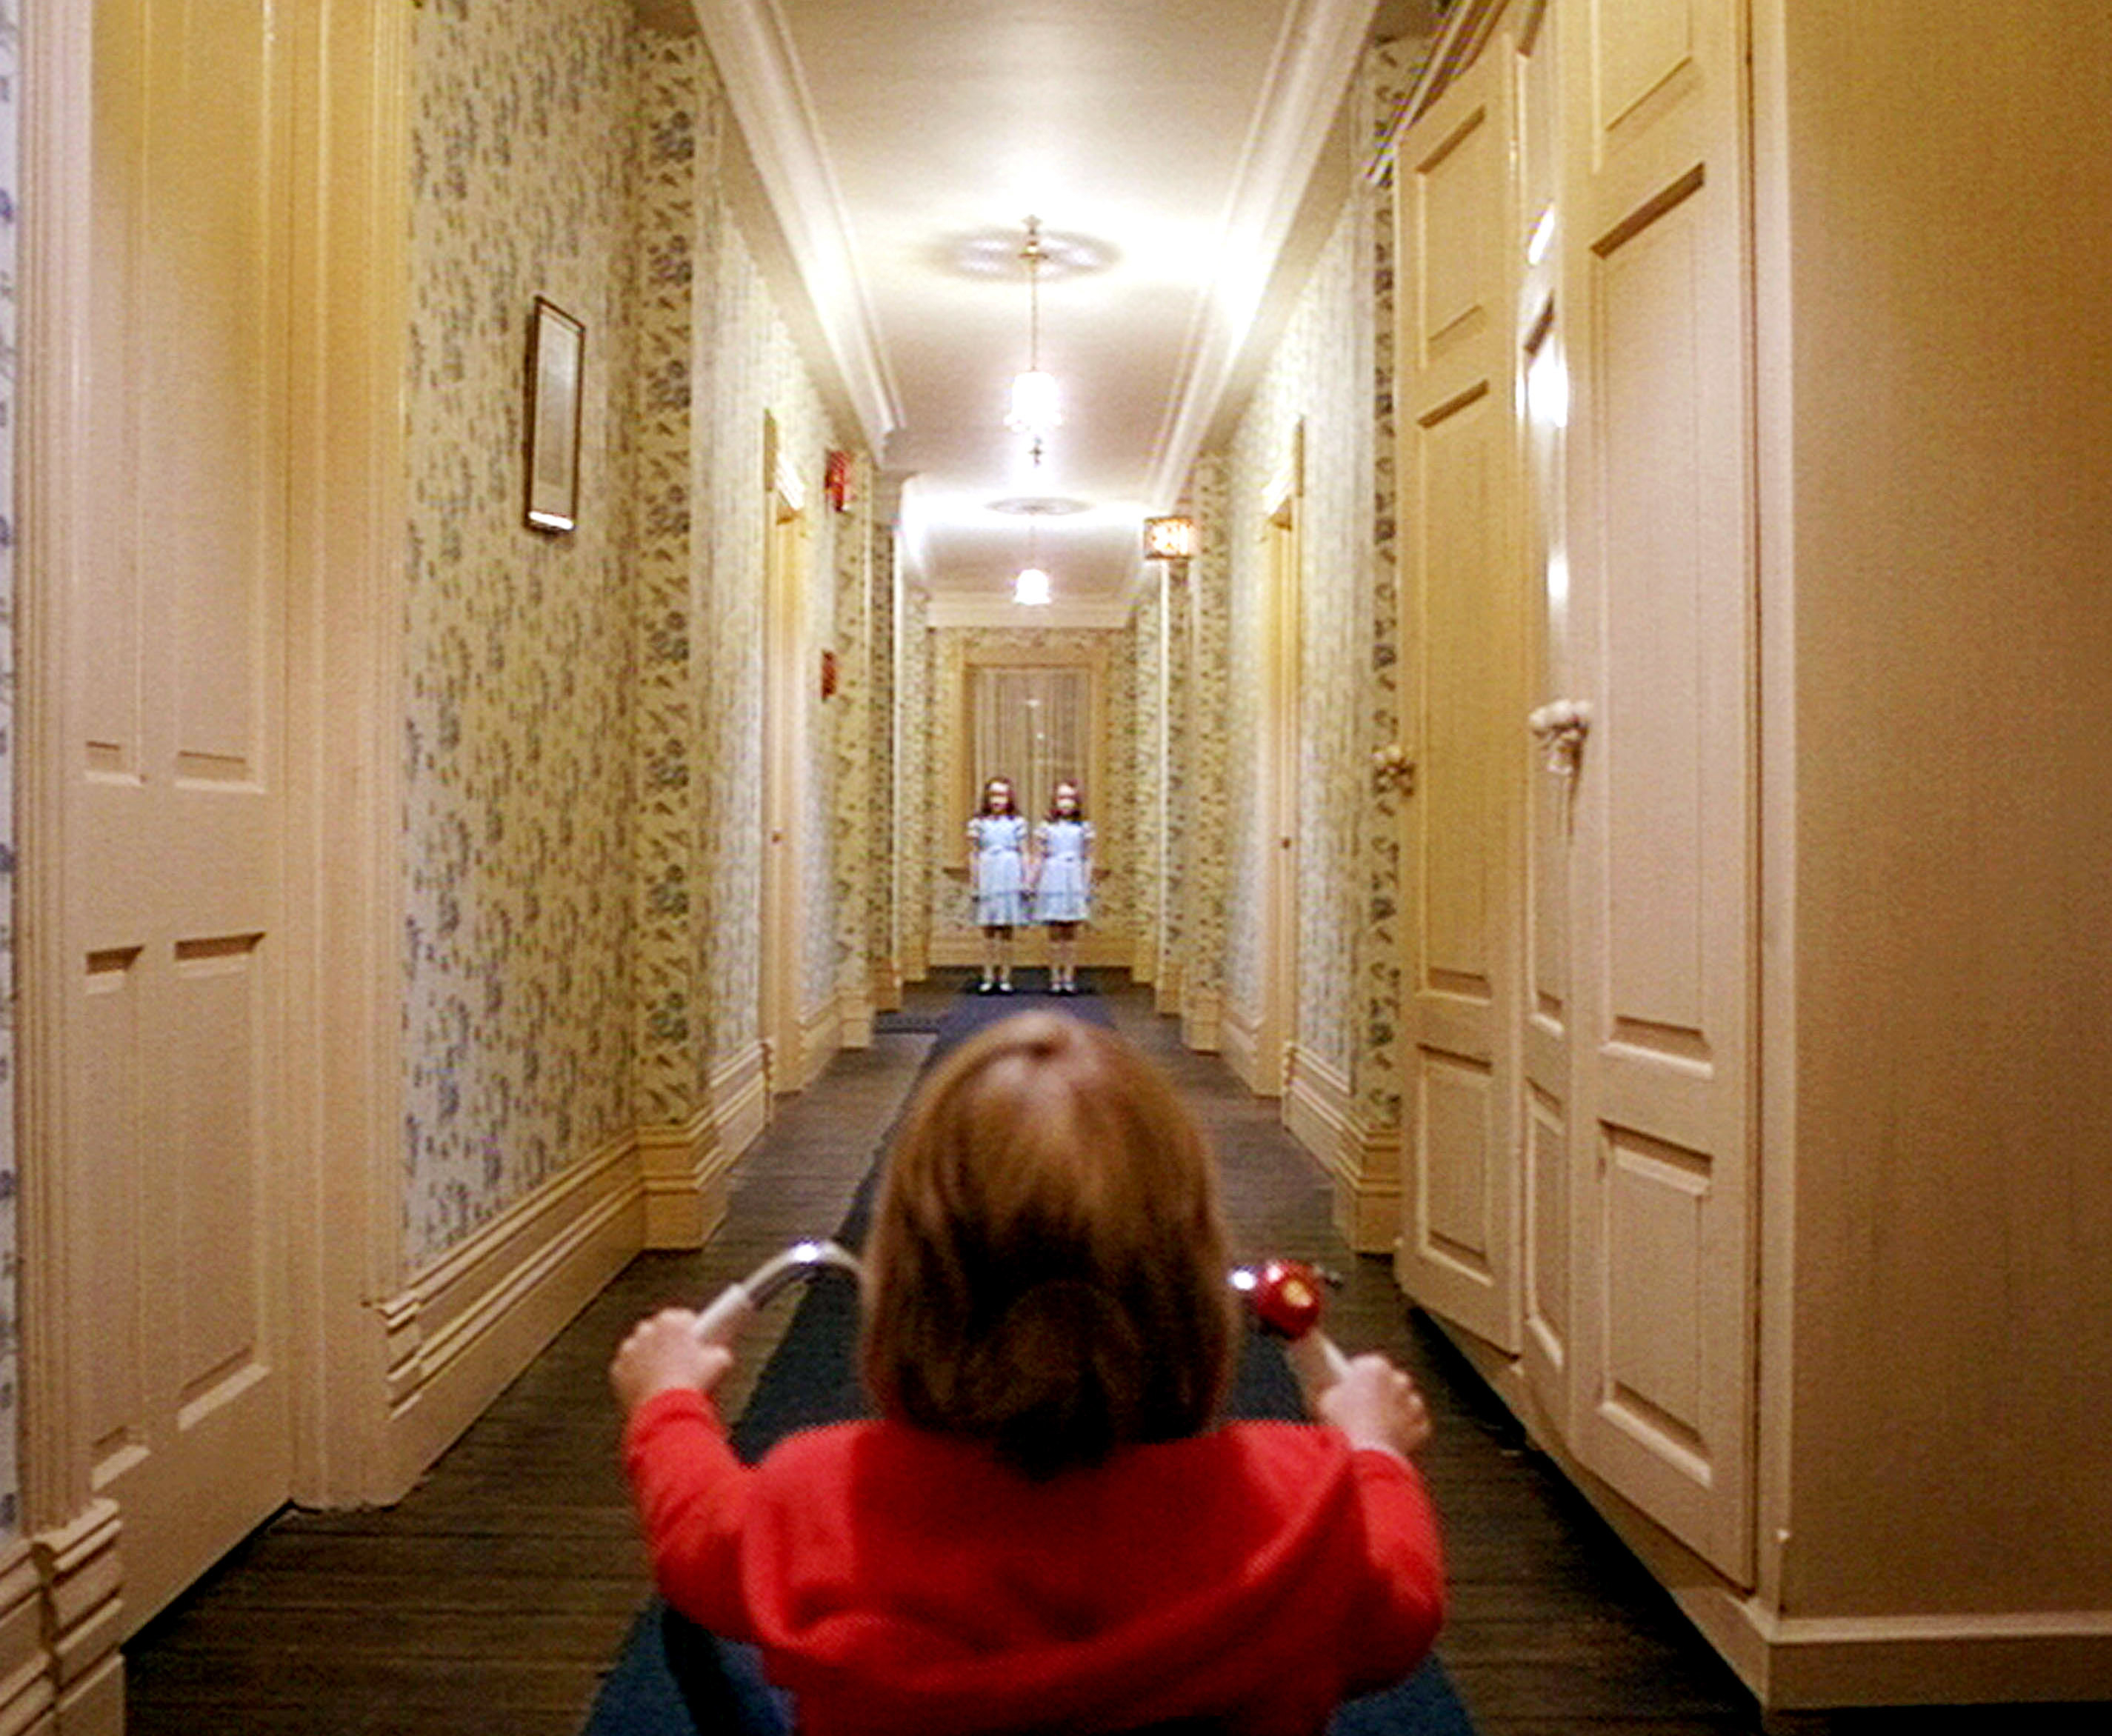 Twin girls standing at the end of a hallway and a little boy on a kids bike facing them